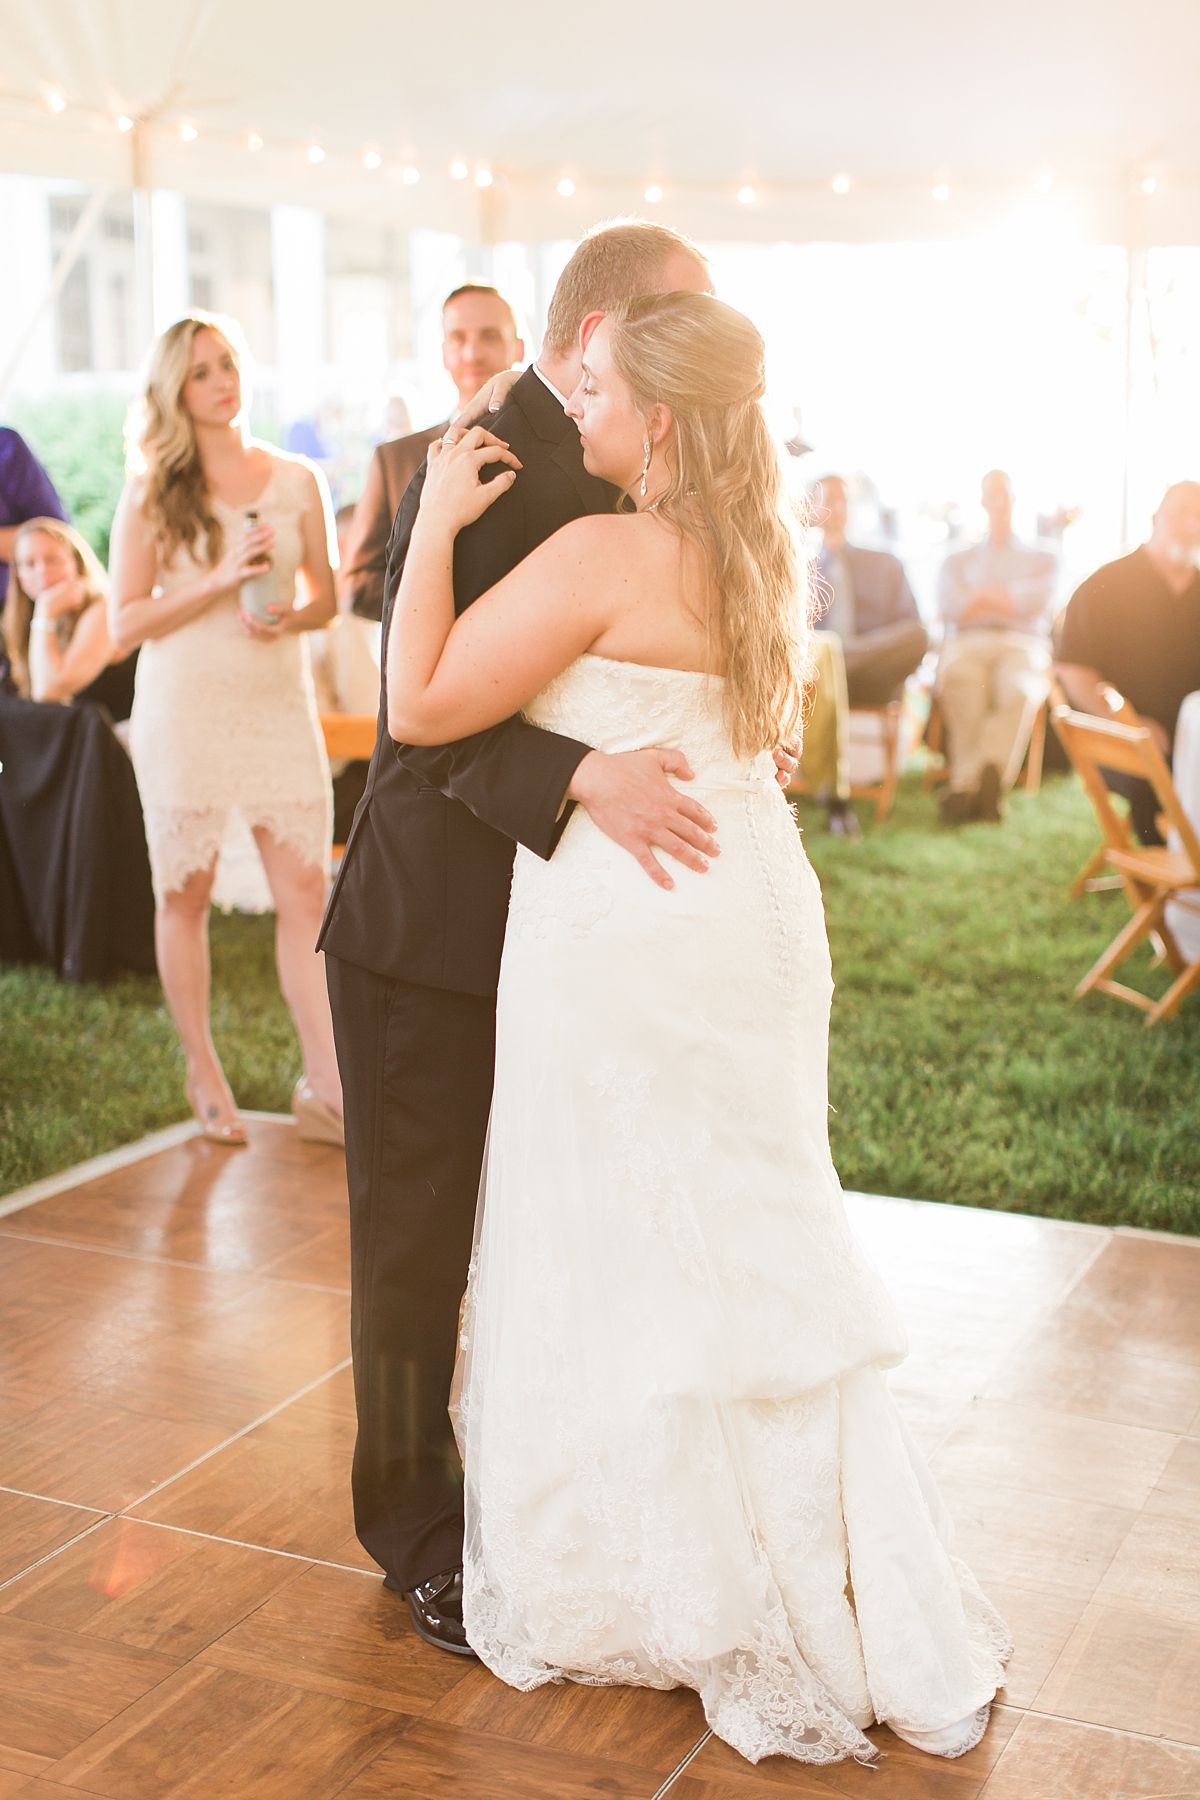 A stunning May wedding at a private family estate in Orange, VA overlooking the beautiful Blue Ridge Mountains and Shenandoah Valley. 